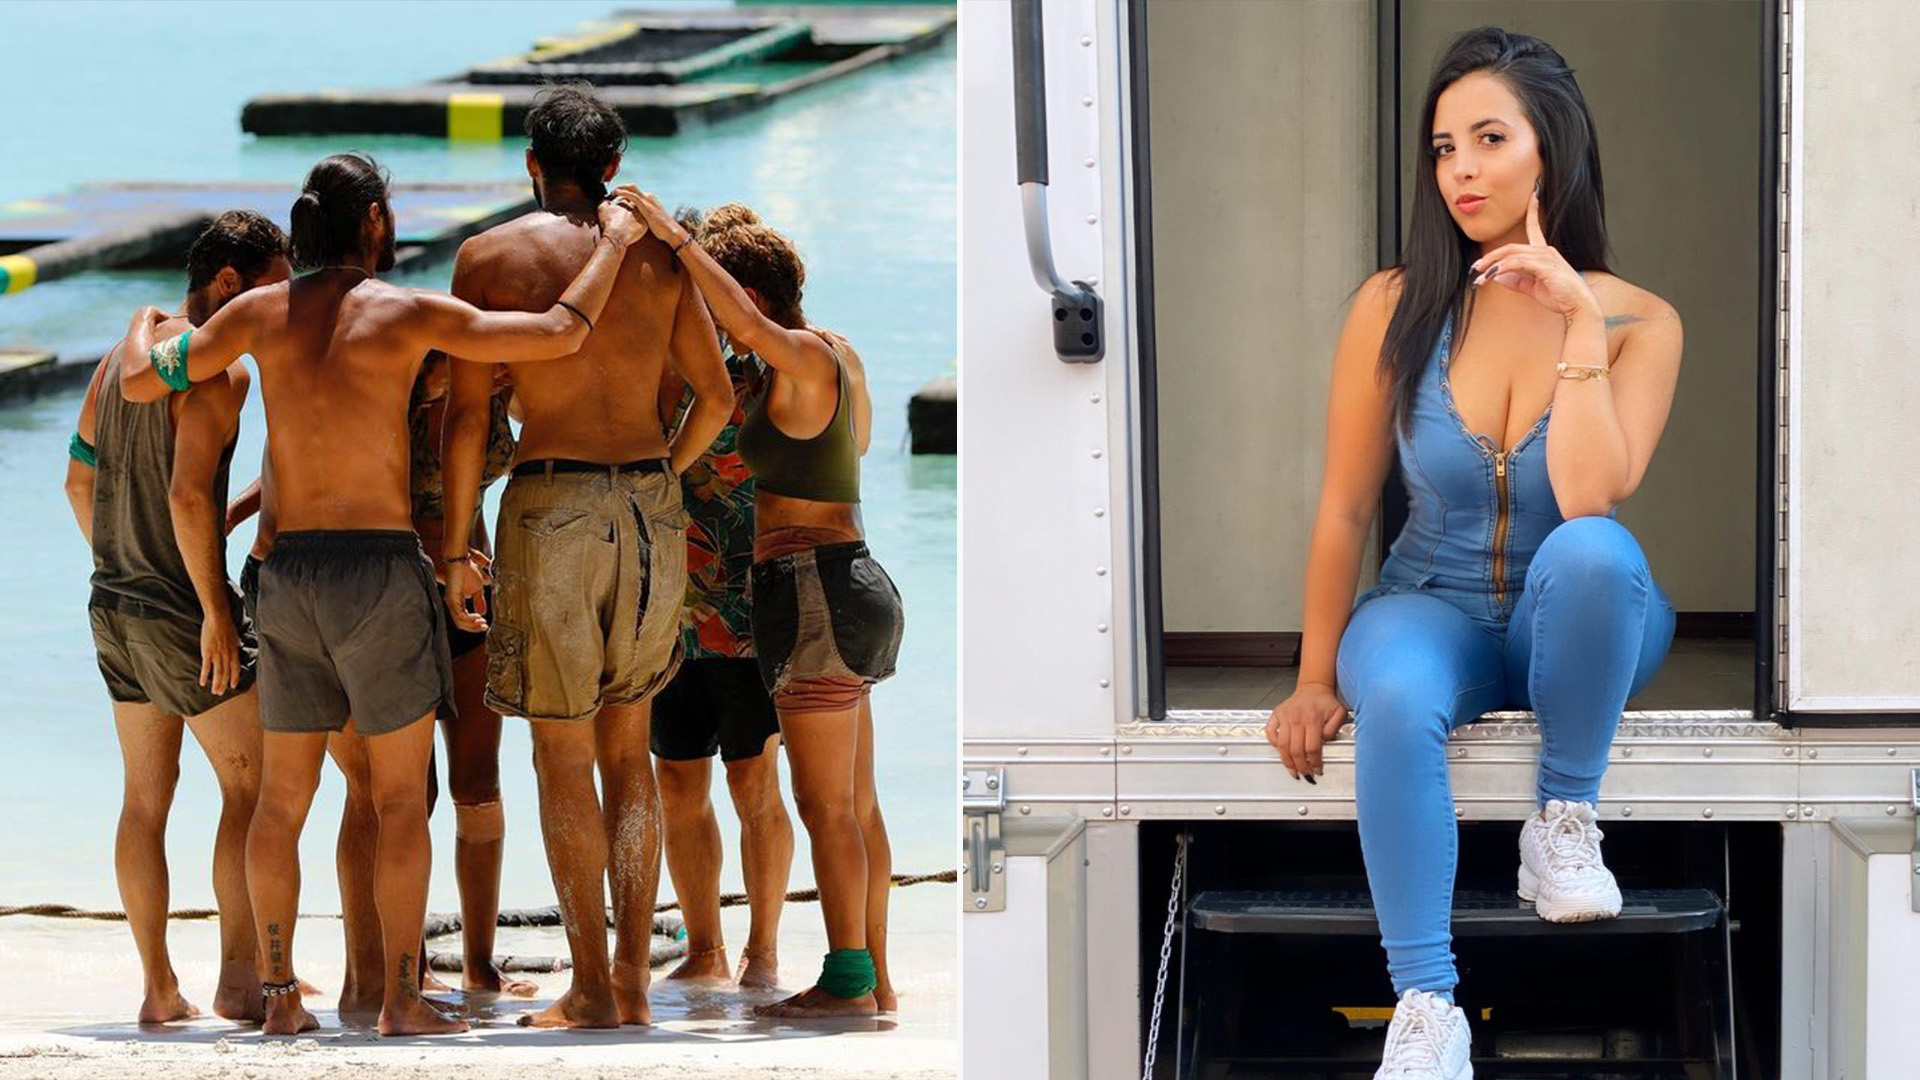 The former Acapulco Shore had immunity from being eliminated in her first week Photo: Instagram/@survivormexico/@jackyoficial_